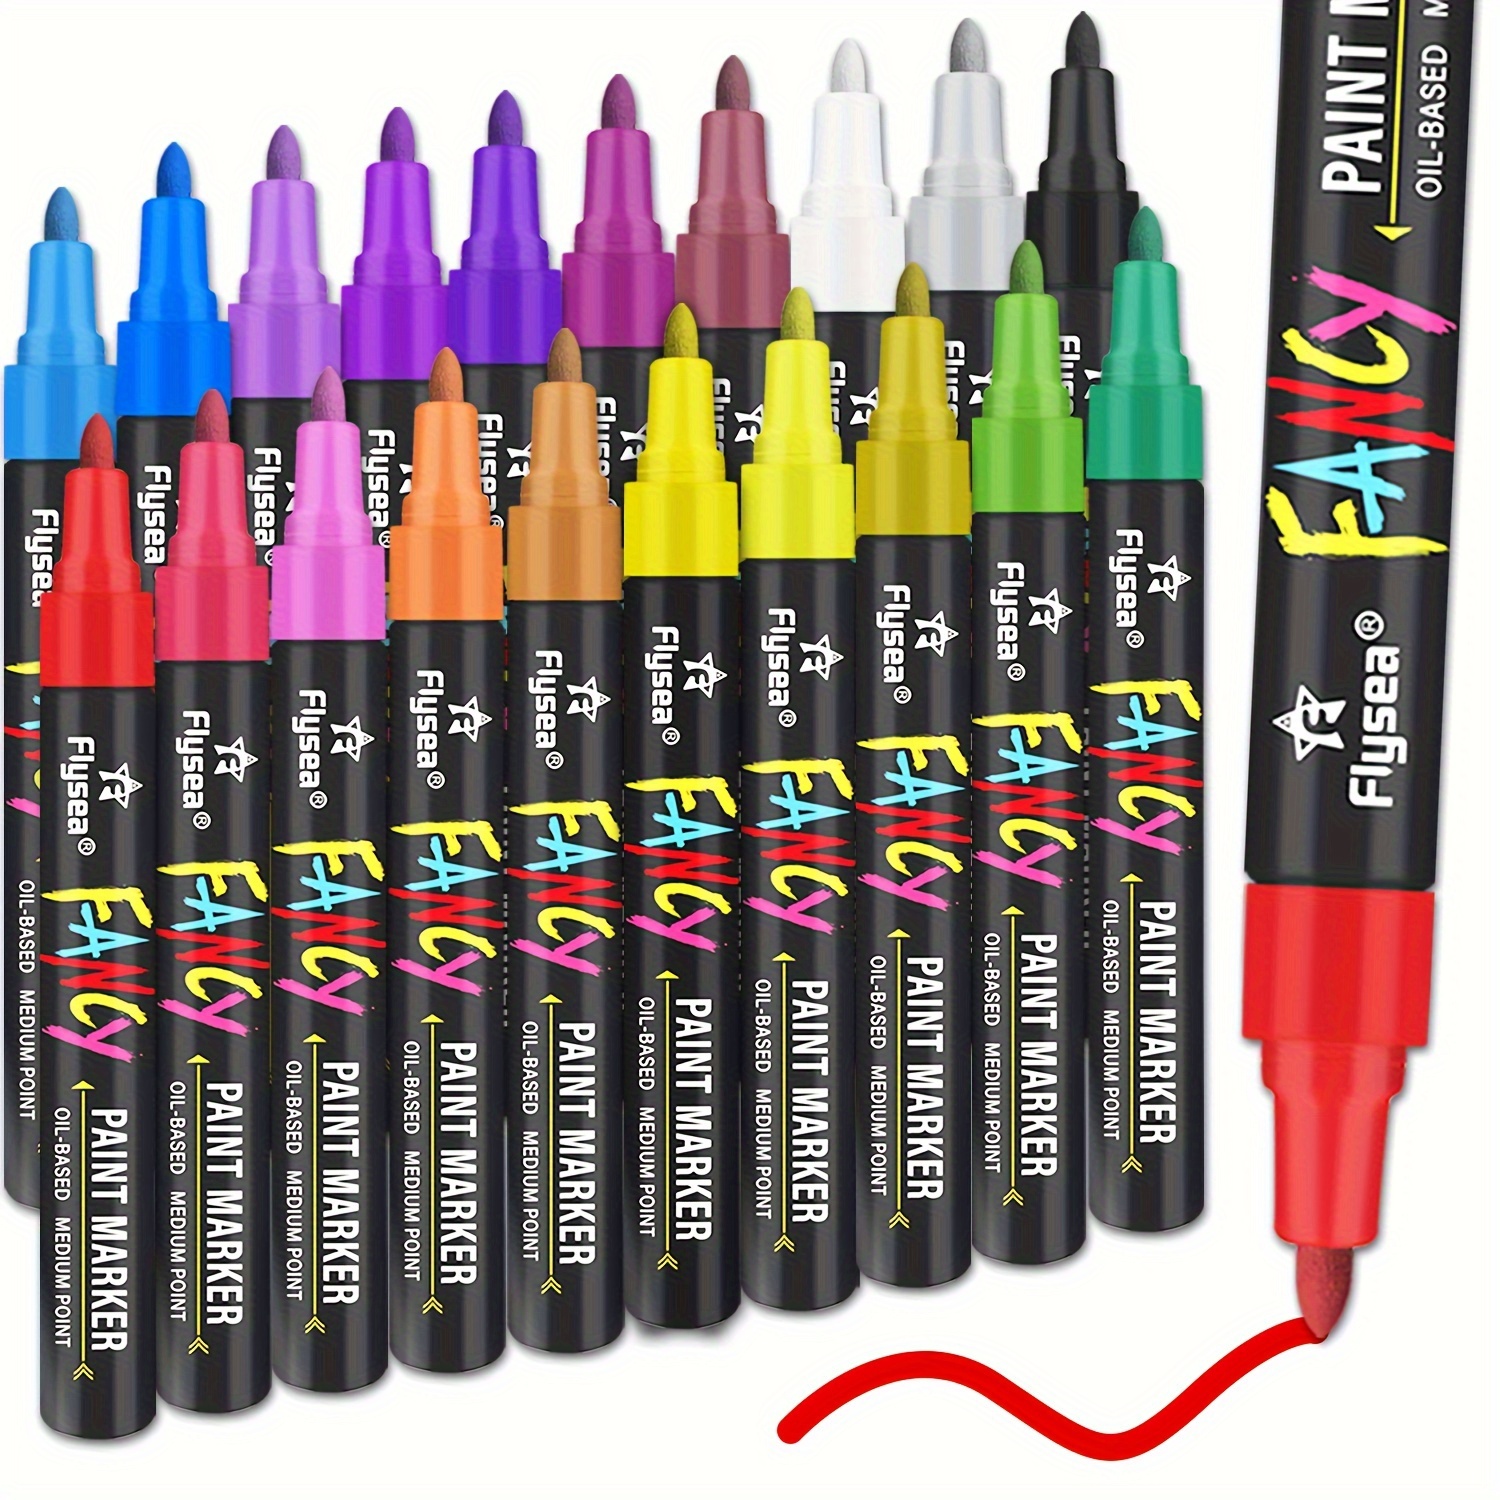 Artistro artistro 12 acrylic paint pens for fabric, canvas, rock, glass,  wood - 3mm medium tip paint markers-ideal art supplies for ad